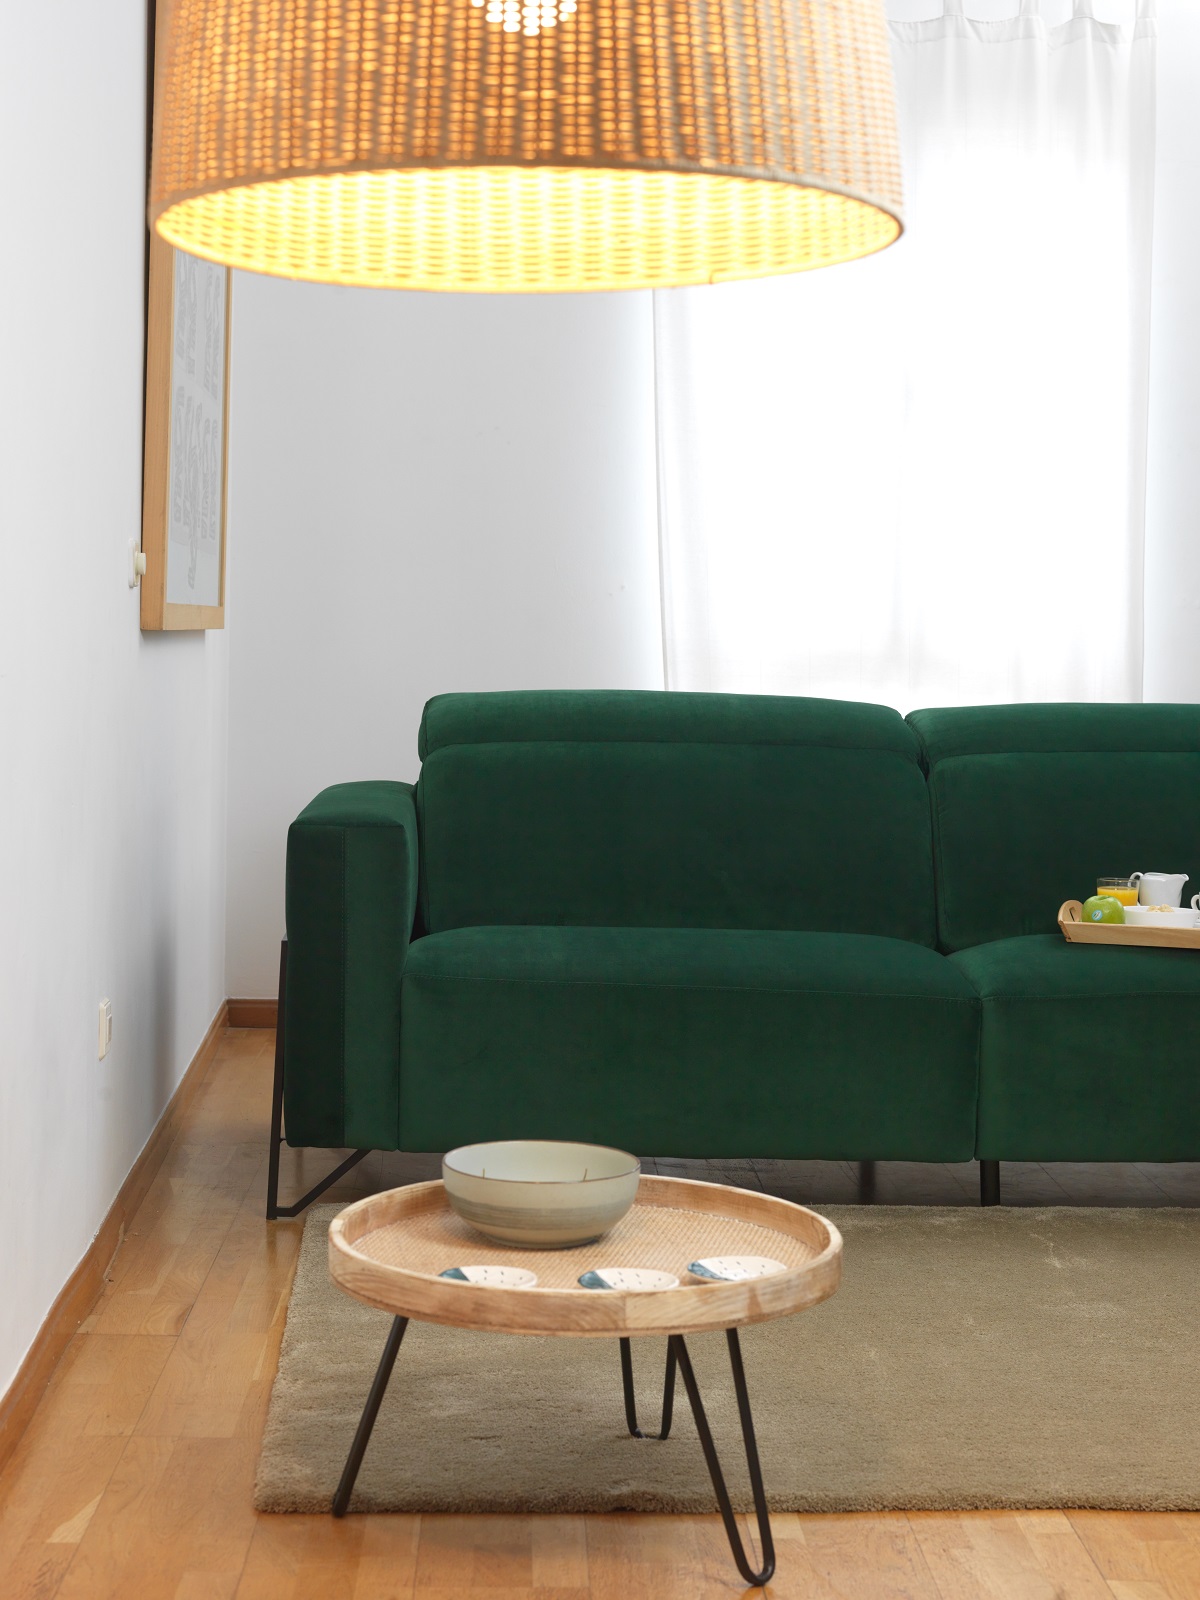 green velvet sofa with wicker lampshade and small wooden table